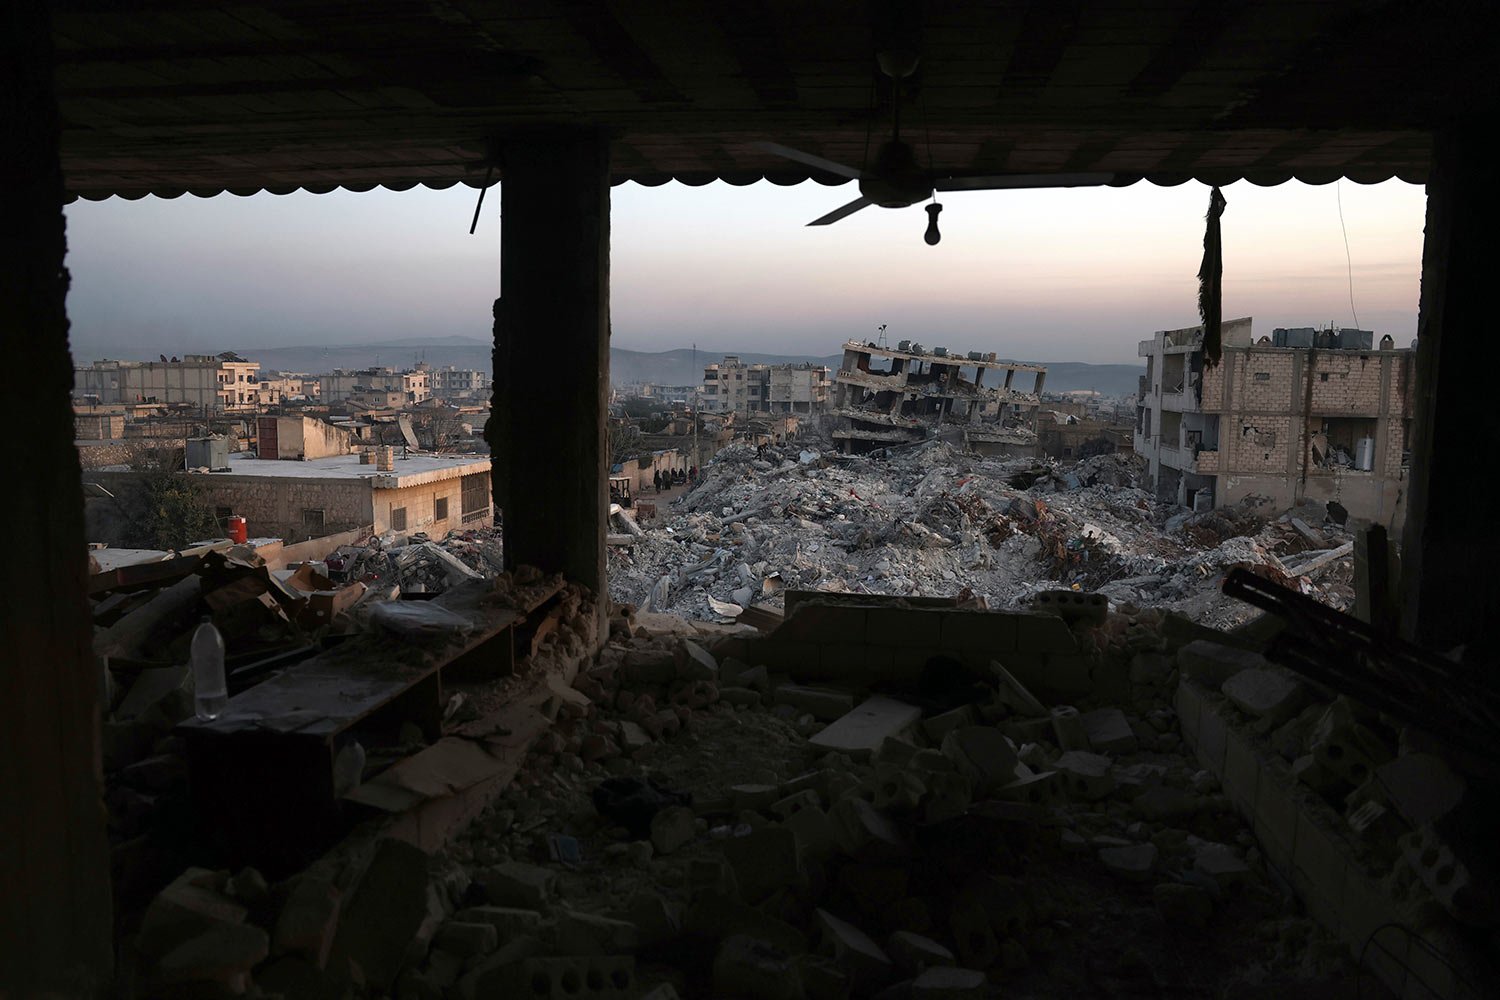  Collapsed buildings are seen through the windows of a damaged house following a devastating earthquake in the town of Jinderis, Aleppo province, Syria, Thursday, Feb. 9, 2023.  (AP Photo/Ghaith Alsayed) 